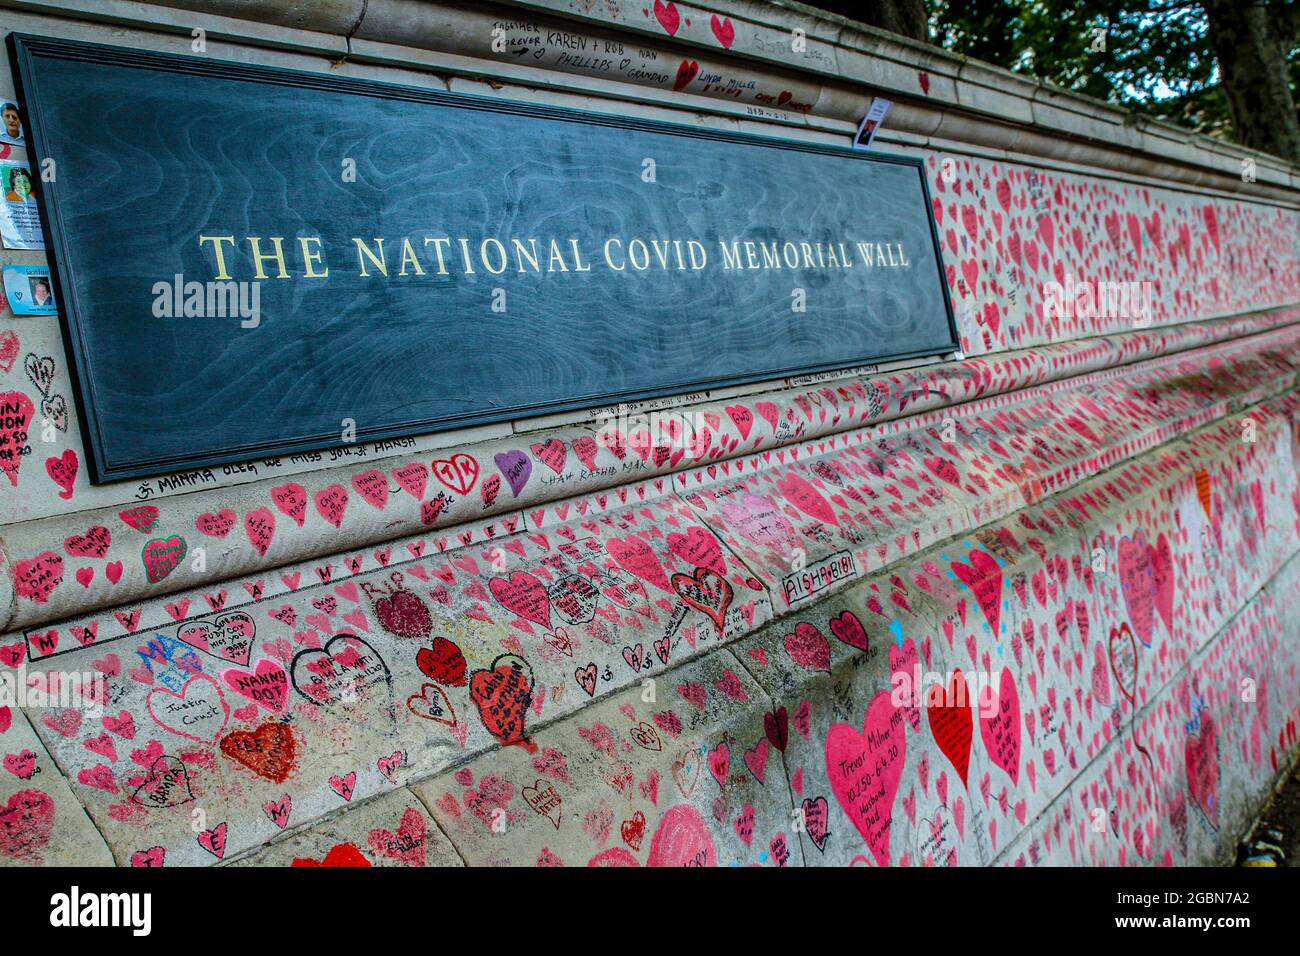 The National Covid Memorial Wall runs for about a mile along the Thames river alongside St Thomas' hospital in Westminster. The memorial began around April 2021 and its decorated with more than 150,000 red hearts each representing a life lost to Covid19. (Photo by David Mbiyu / SOPA Images/Sipa USA) Stock Photo